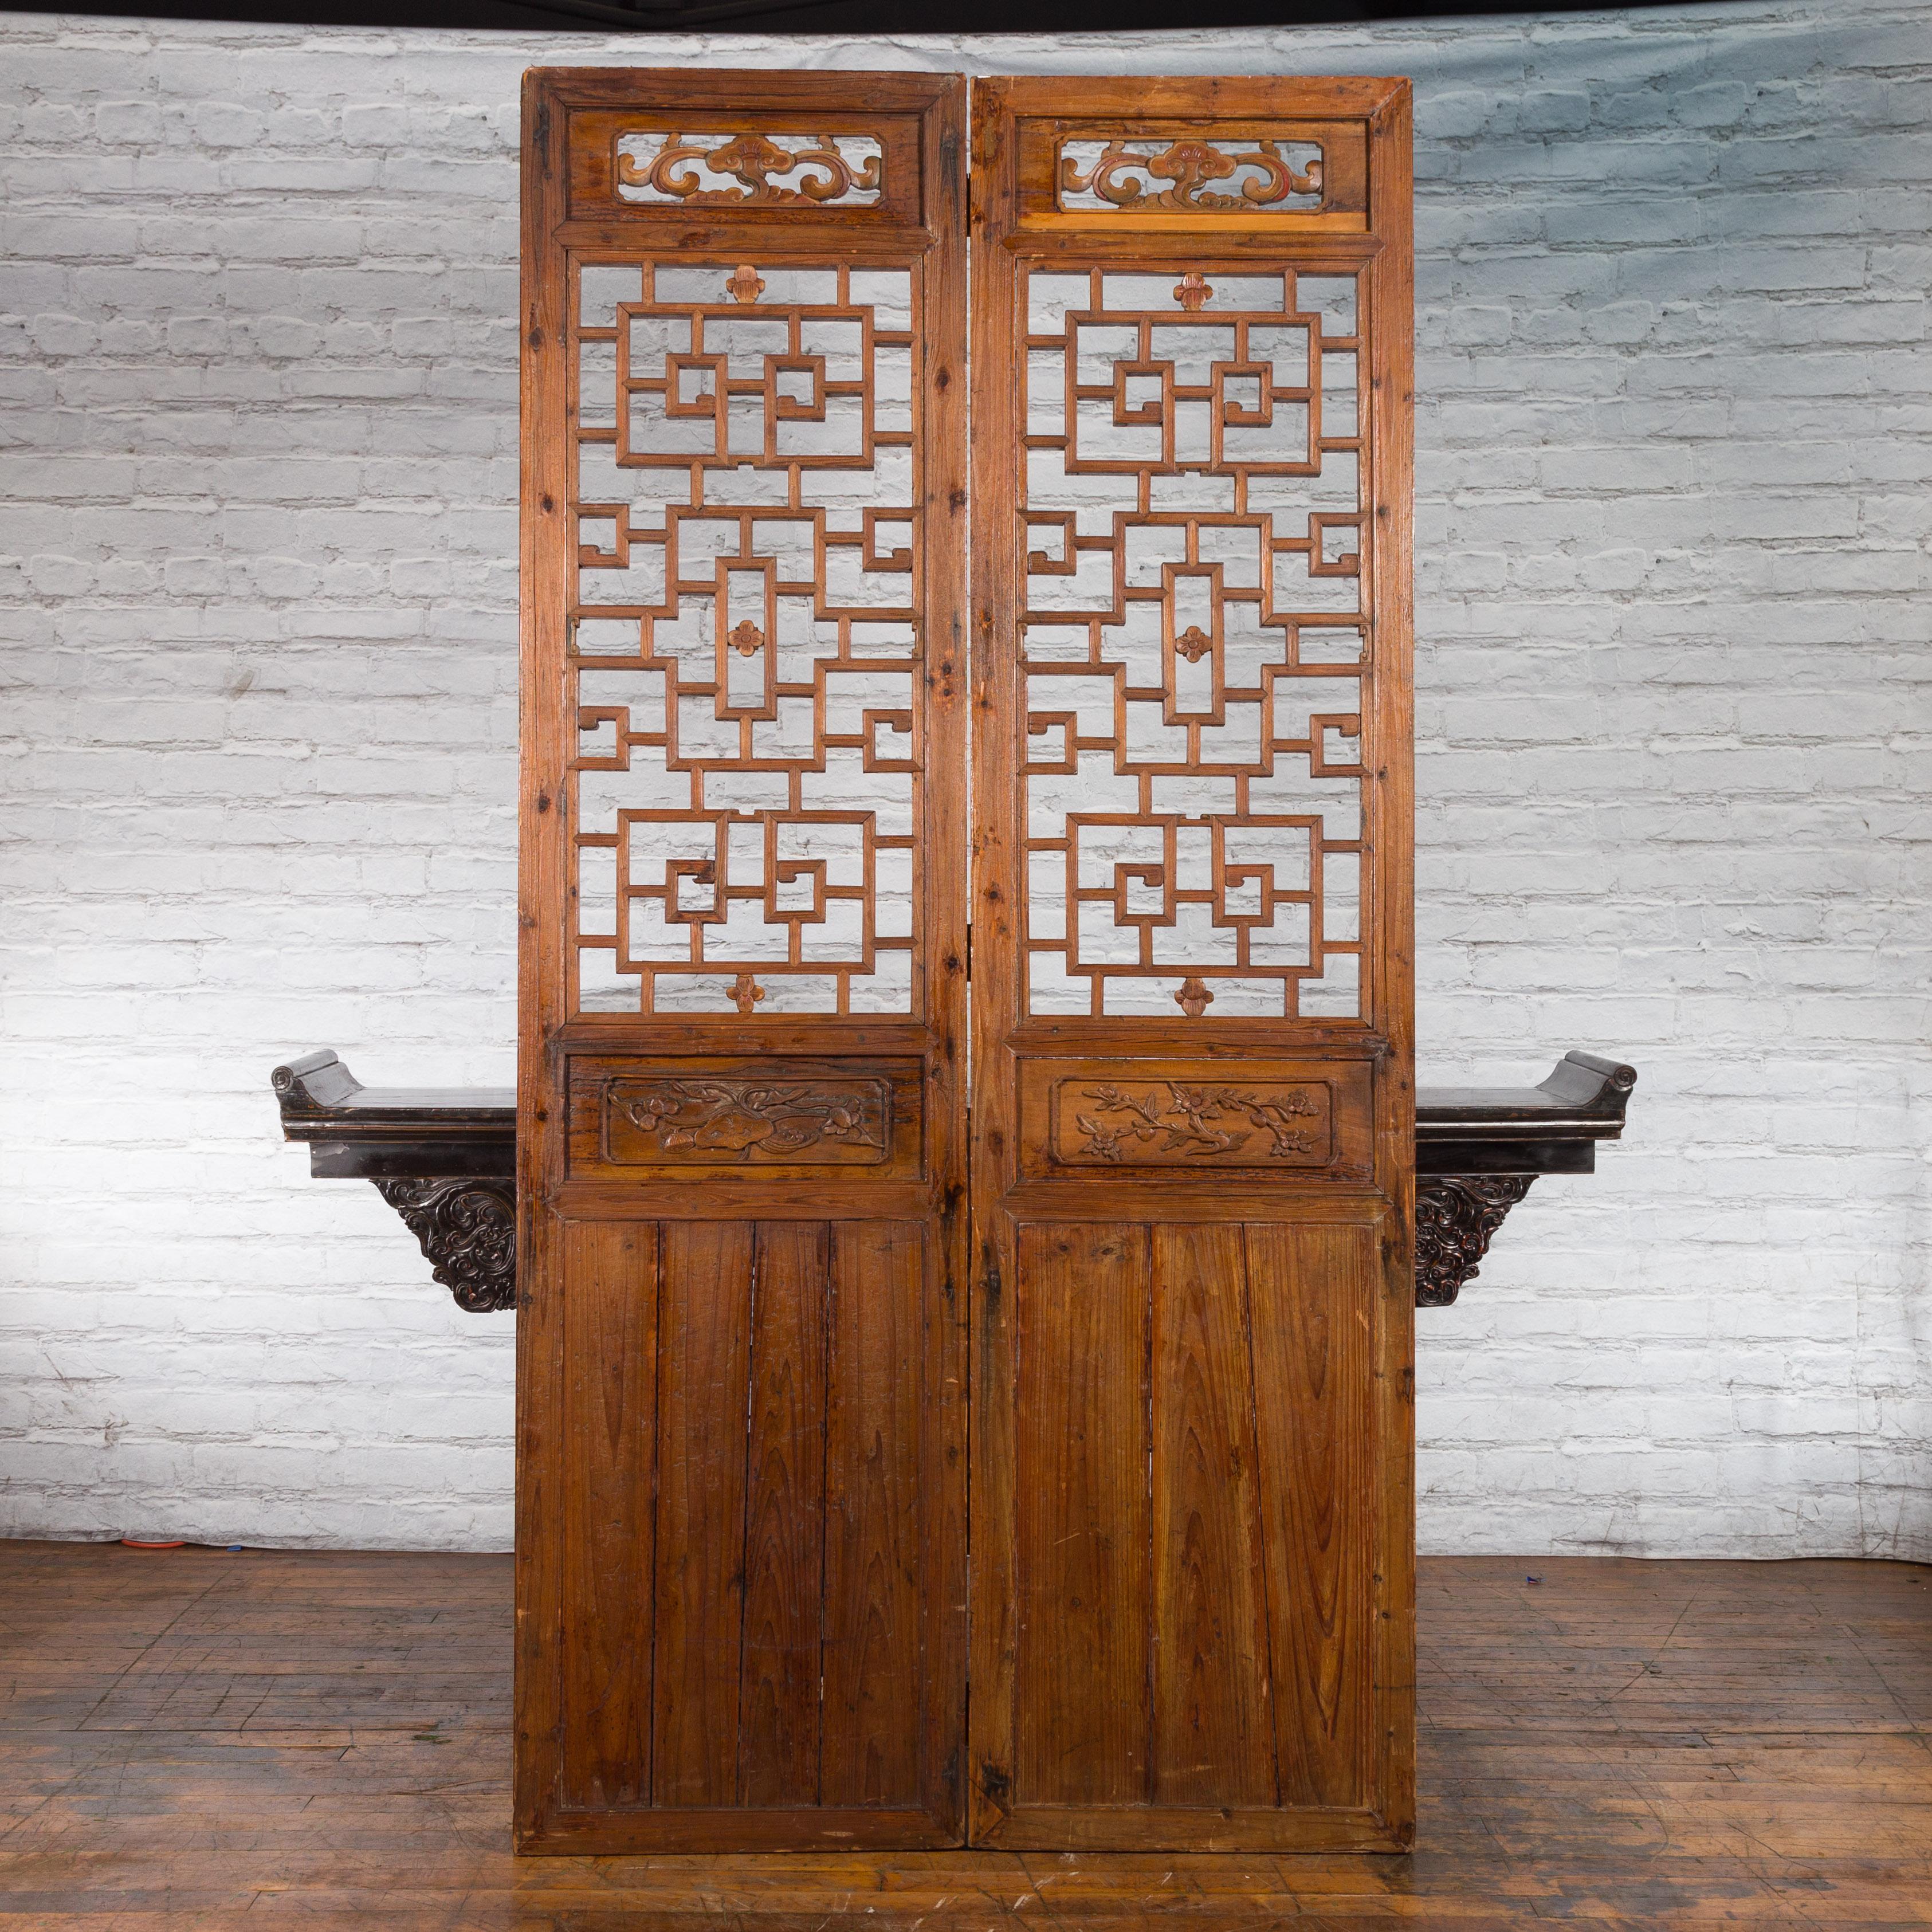 A pair of Chinese Qing Dynasty period large carved architectural panels from the 19th century, with fretwork. Created in China during the Qing Dynasty, each of this pair of architectural panels captures our attention with its fretwork motifs topped